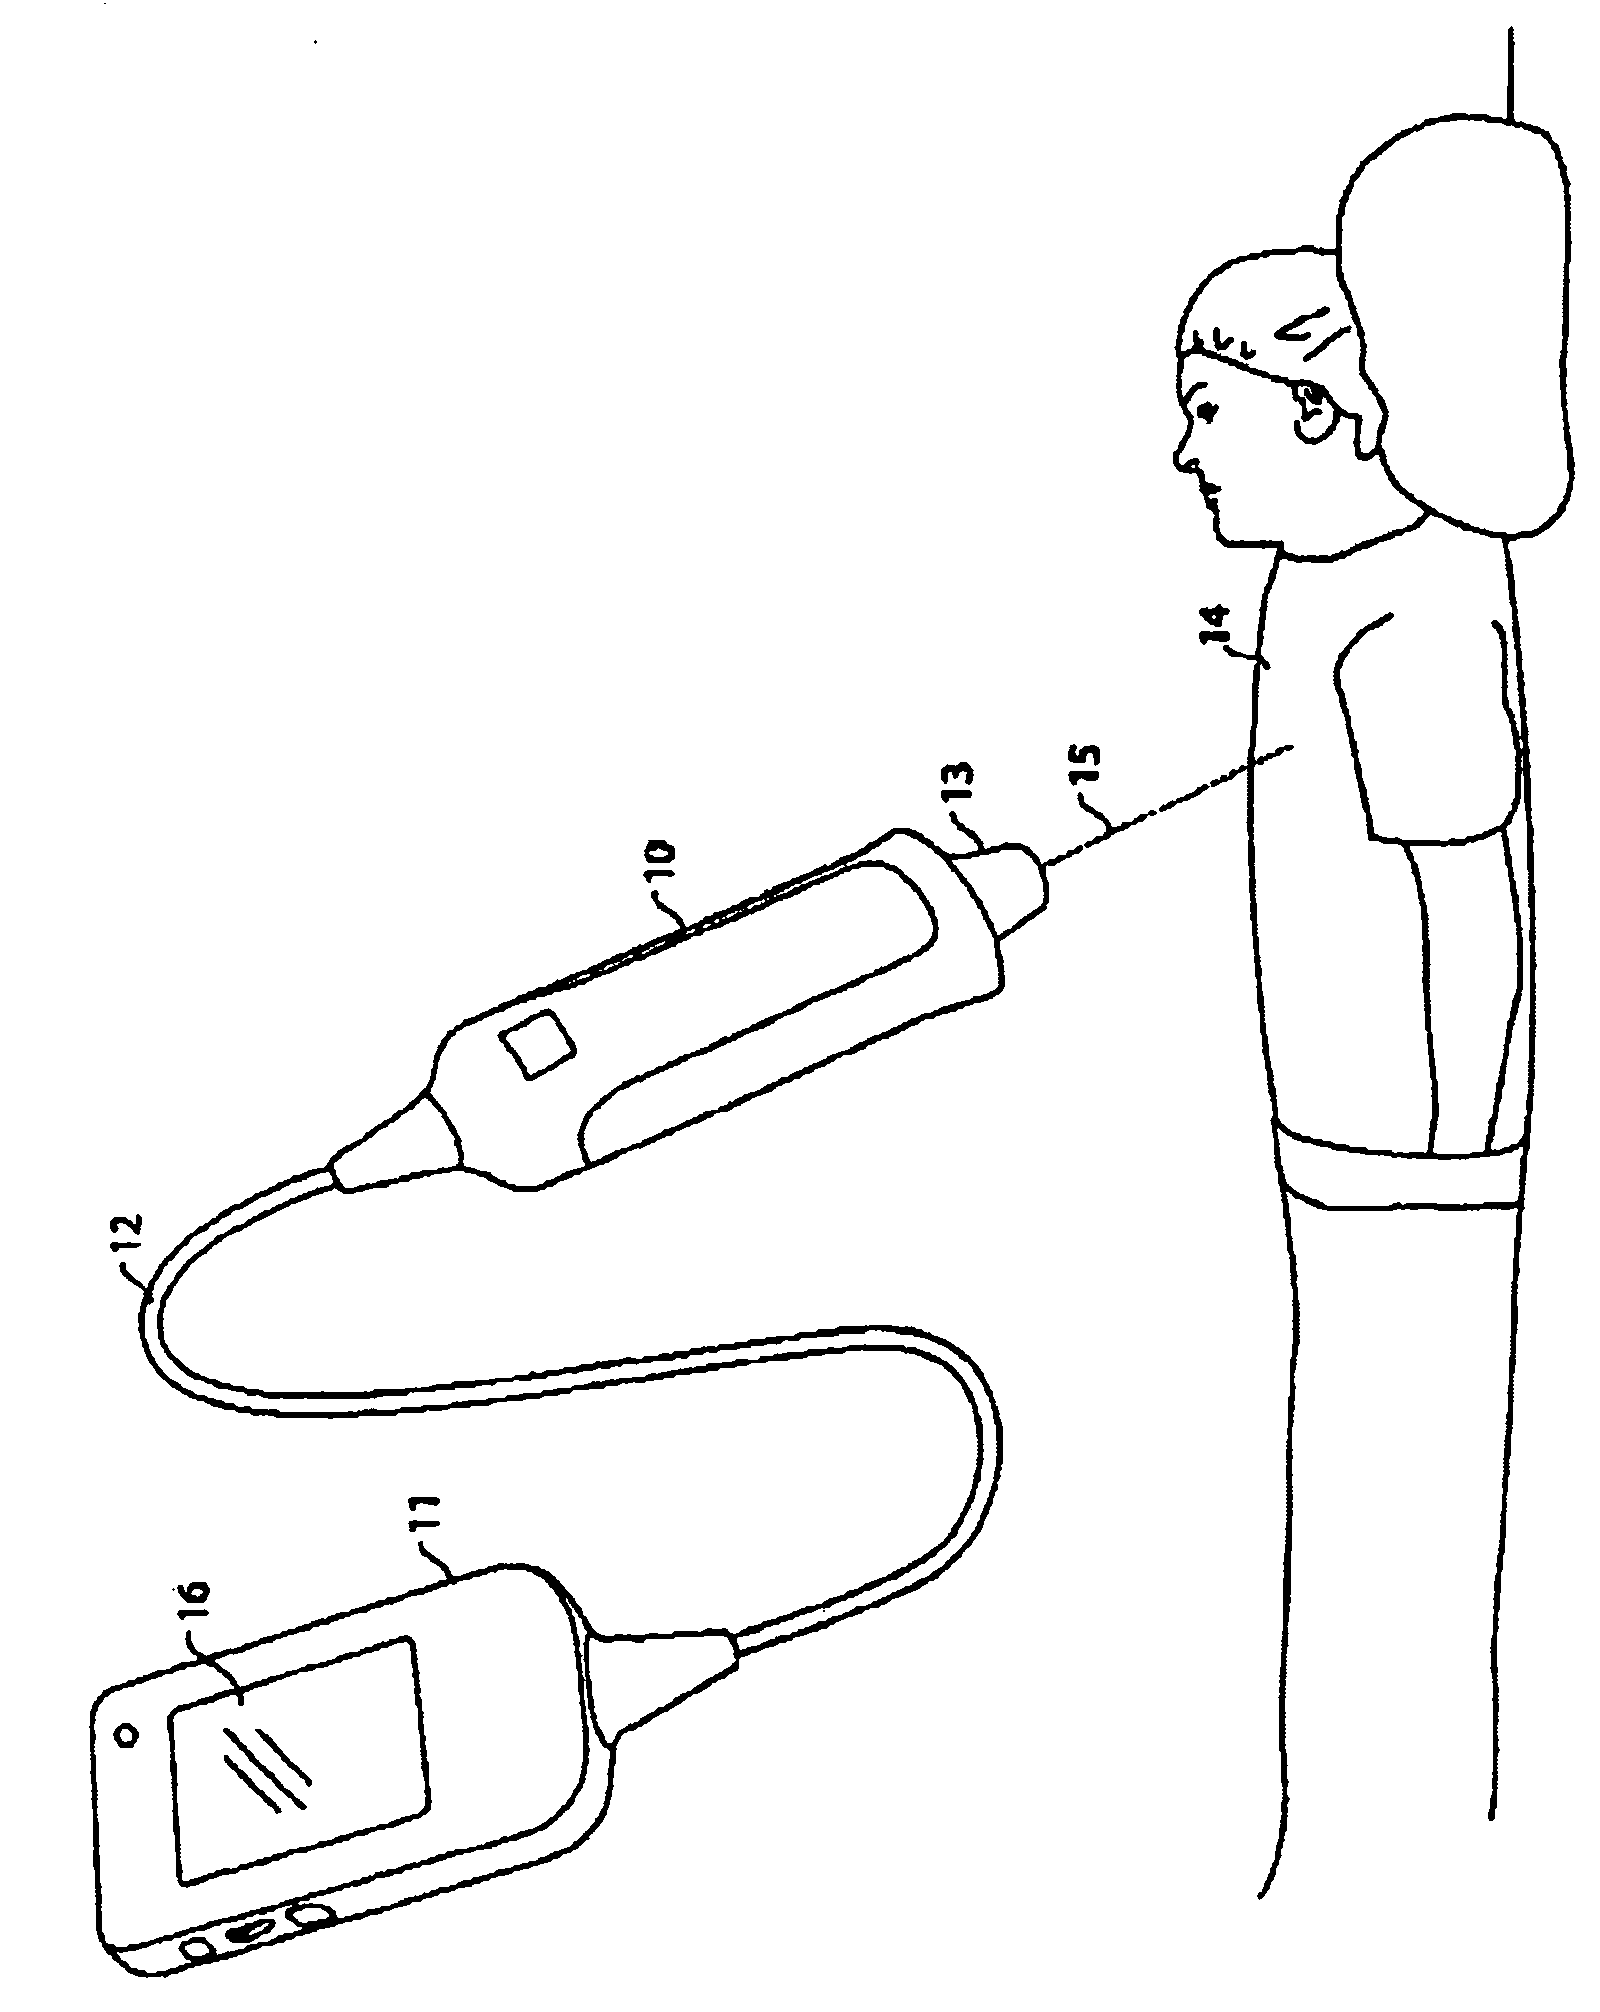 Apparatus and method for medical scanning